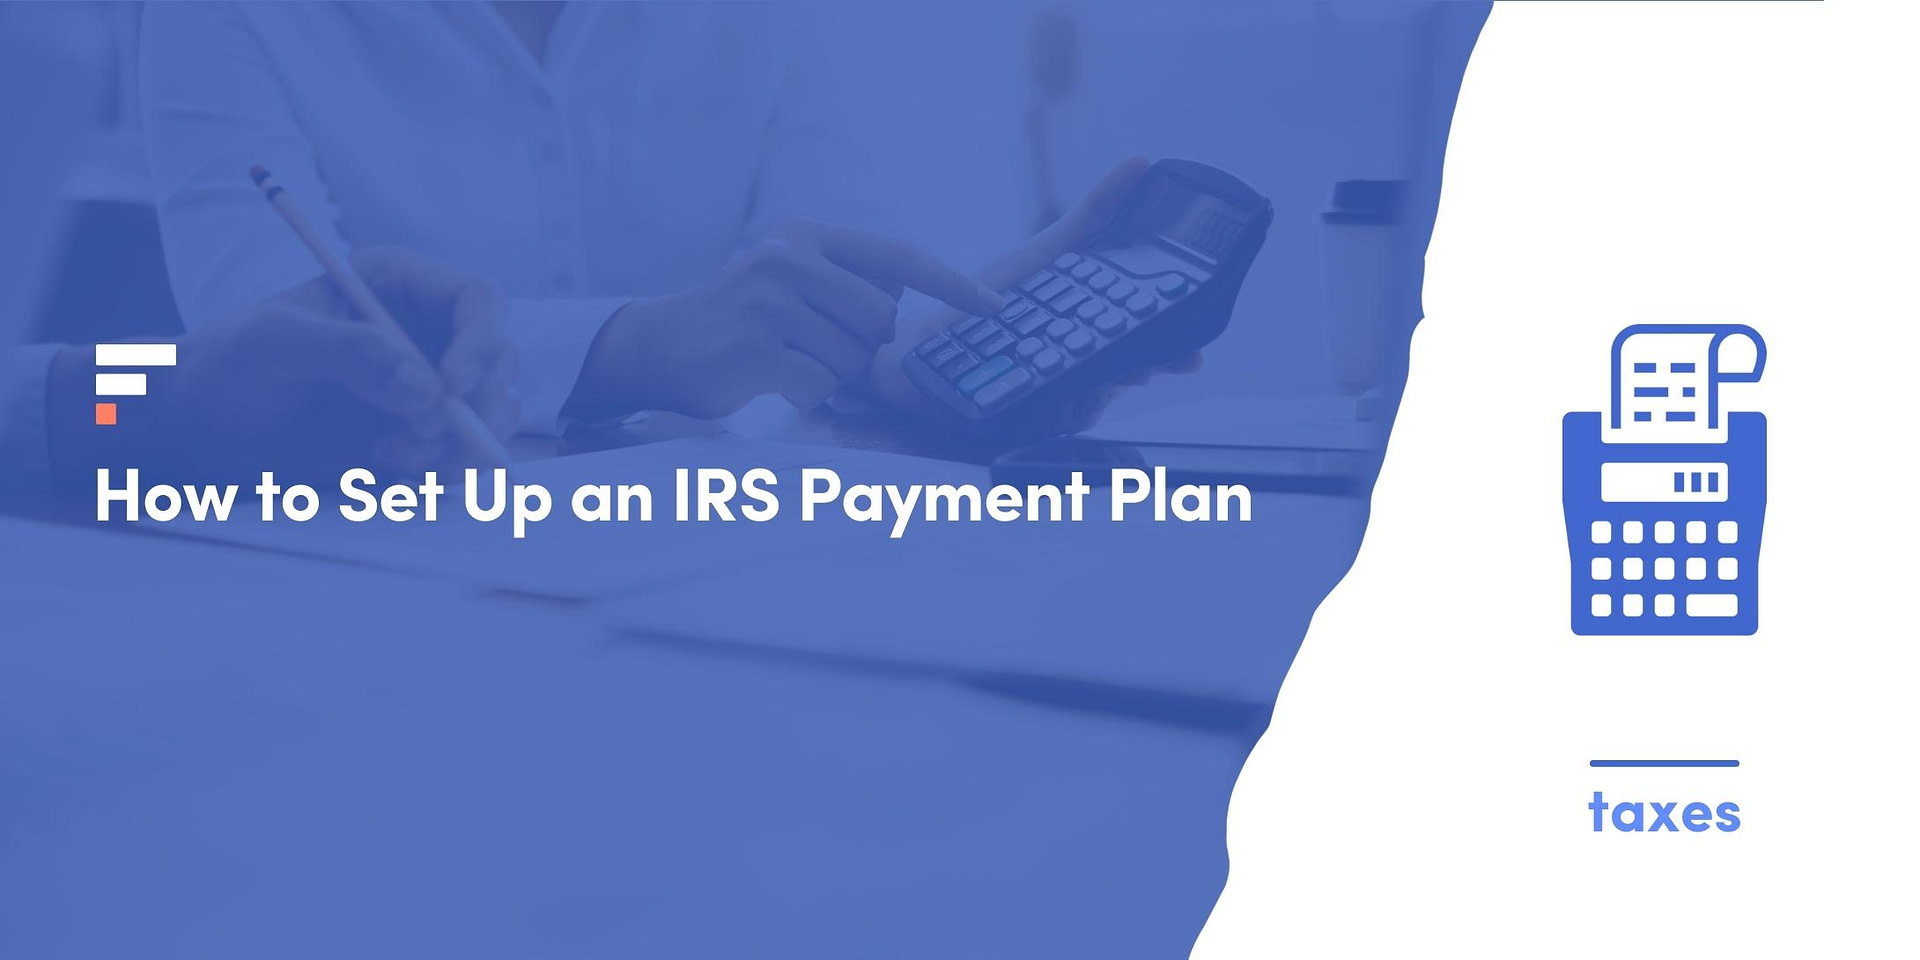 5 Easy Steps to Set Up an IRS Payment Plan